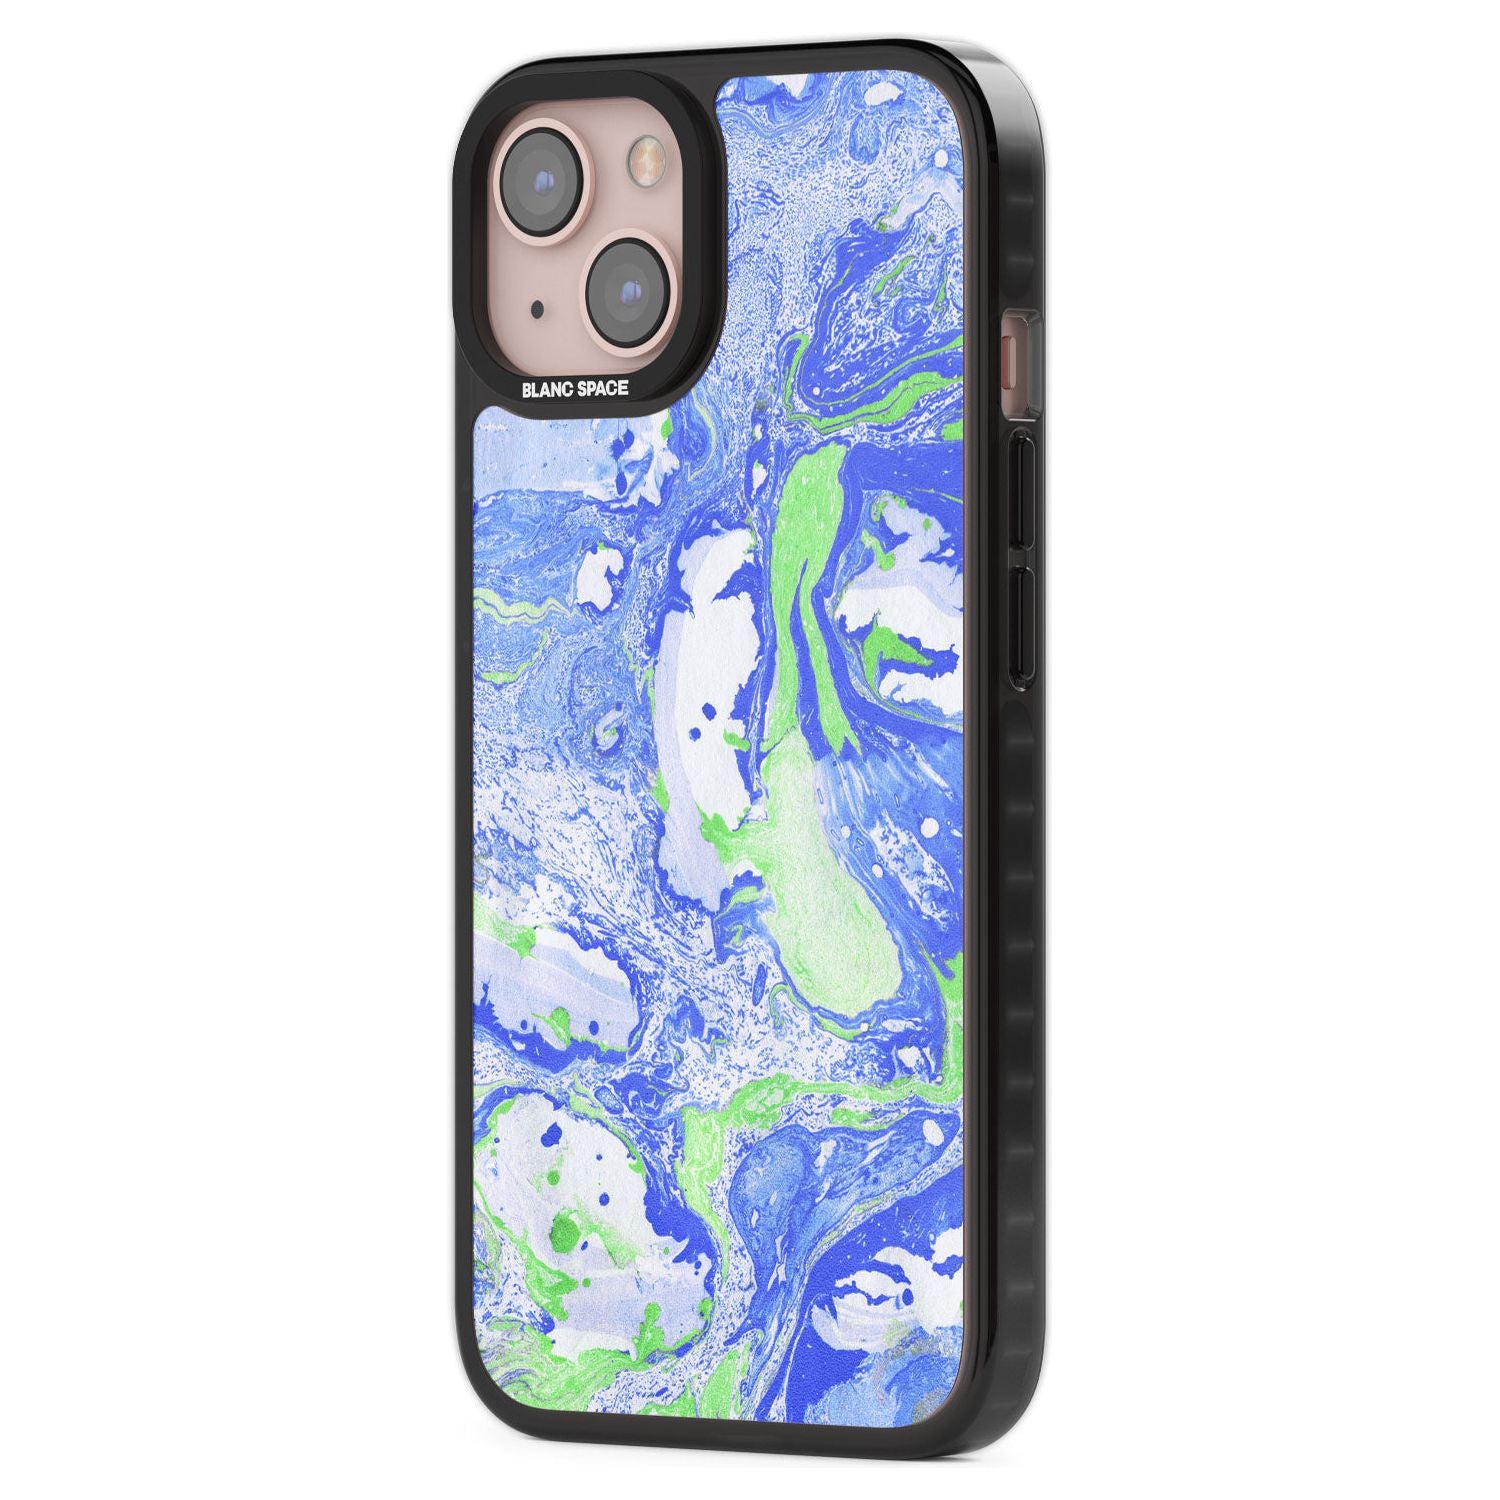 Dark Blue & Green Marbled Paper Pattern Phone Case iPhone 15 Pro Max / Black Impact Case,iPhone 15 Plus / Black Impact Case,iPhone 15 Pro / Black Impact Case,iPhone 15 / Black Impact Case,iPhone 15 Pro Max / Impact Case,iPhone 15 Plus / Impact Case,iPhone 15 Pro / Impact Case,iPhone 15 / Impact Case,iPhone 15 Pro Max / Magsafe Black Impact Case,iPhone 15 Plus / Magsafe Black Impact Case,iPhone 15 Pro / Magsafe Black Impact Case,iPhone 15 / Magsafe Black Impact Case,iPhone 14 Pro Max / Black Impact Case,iPho